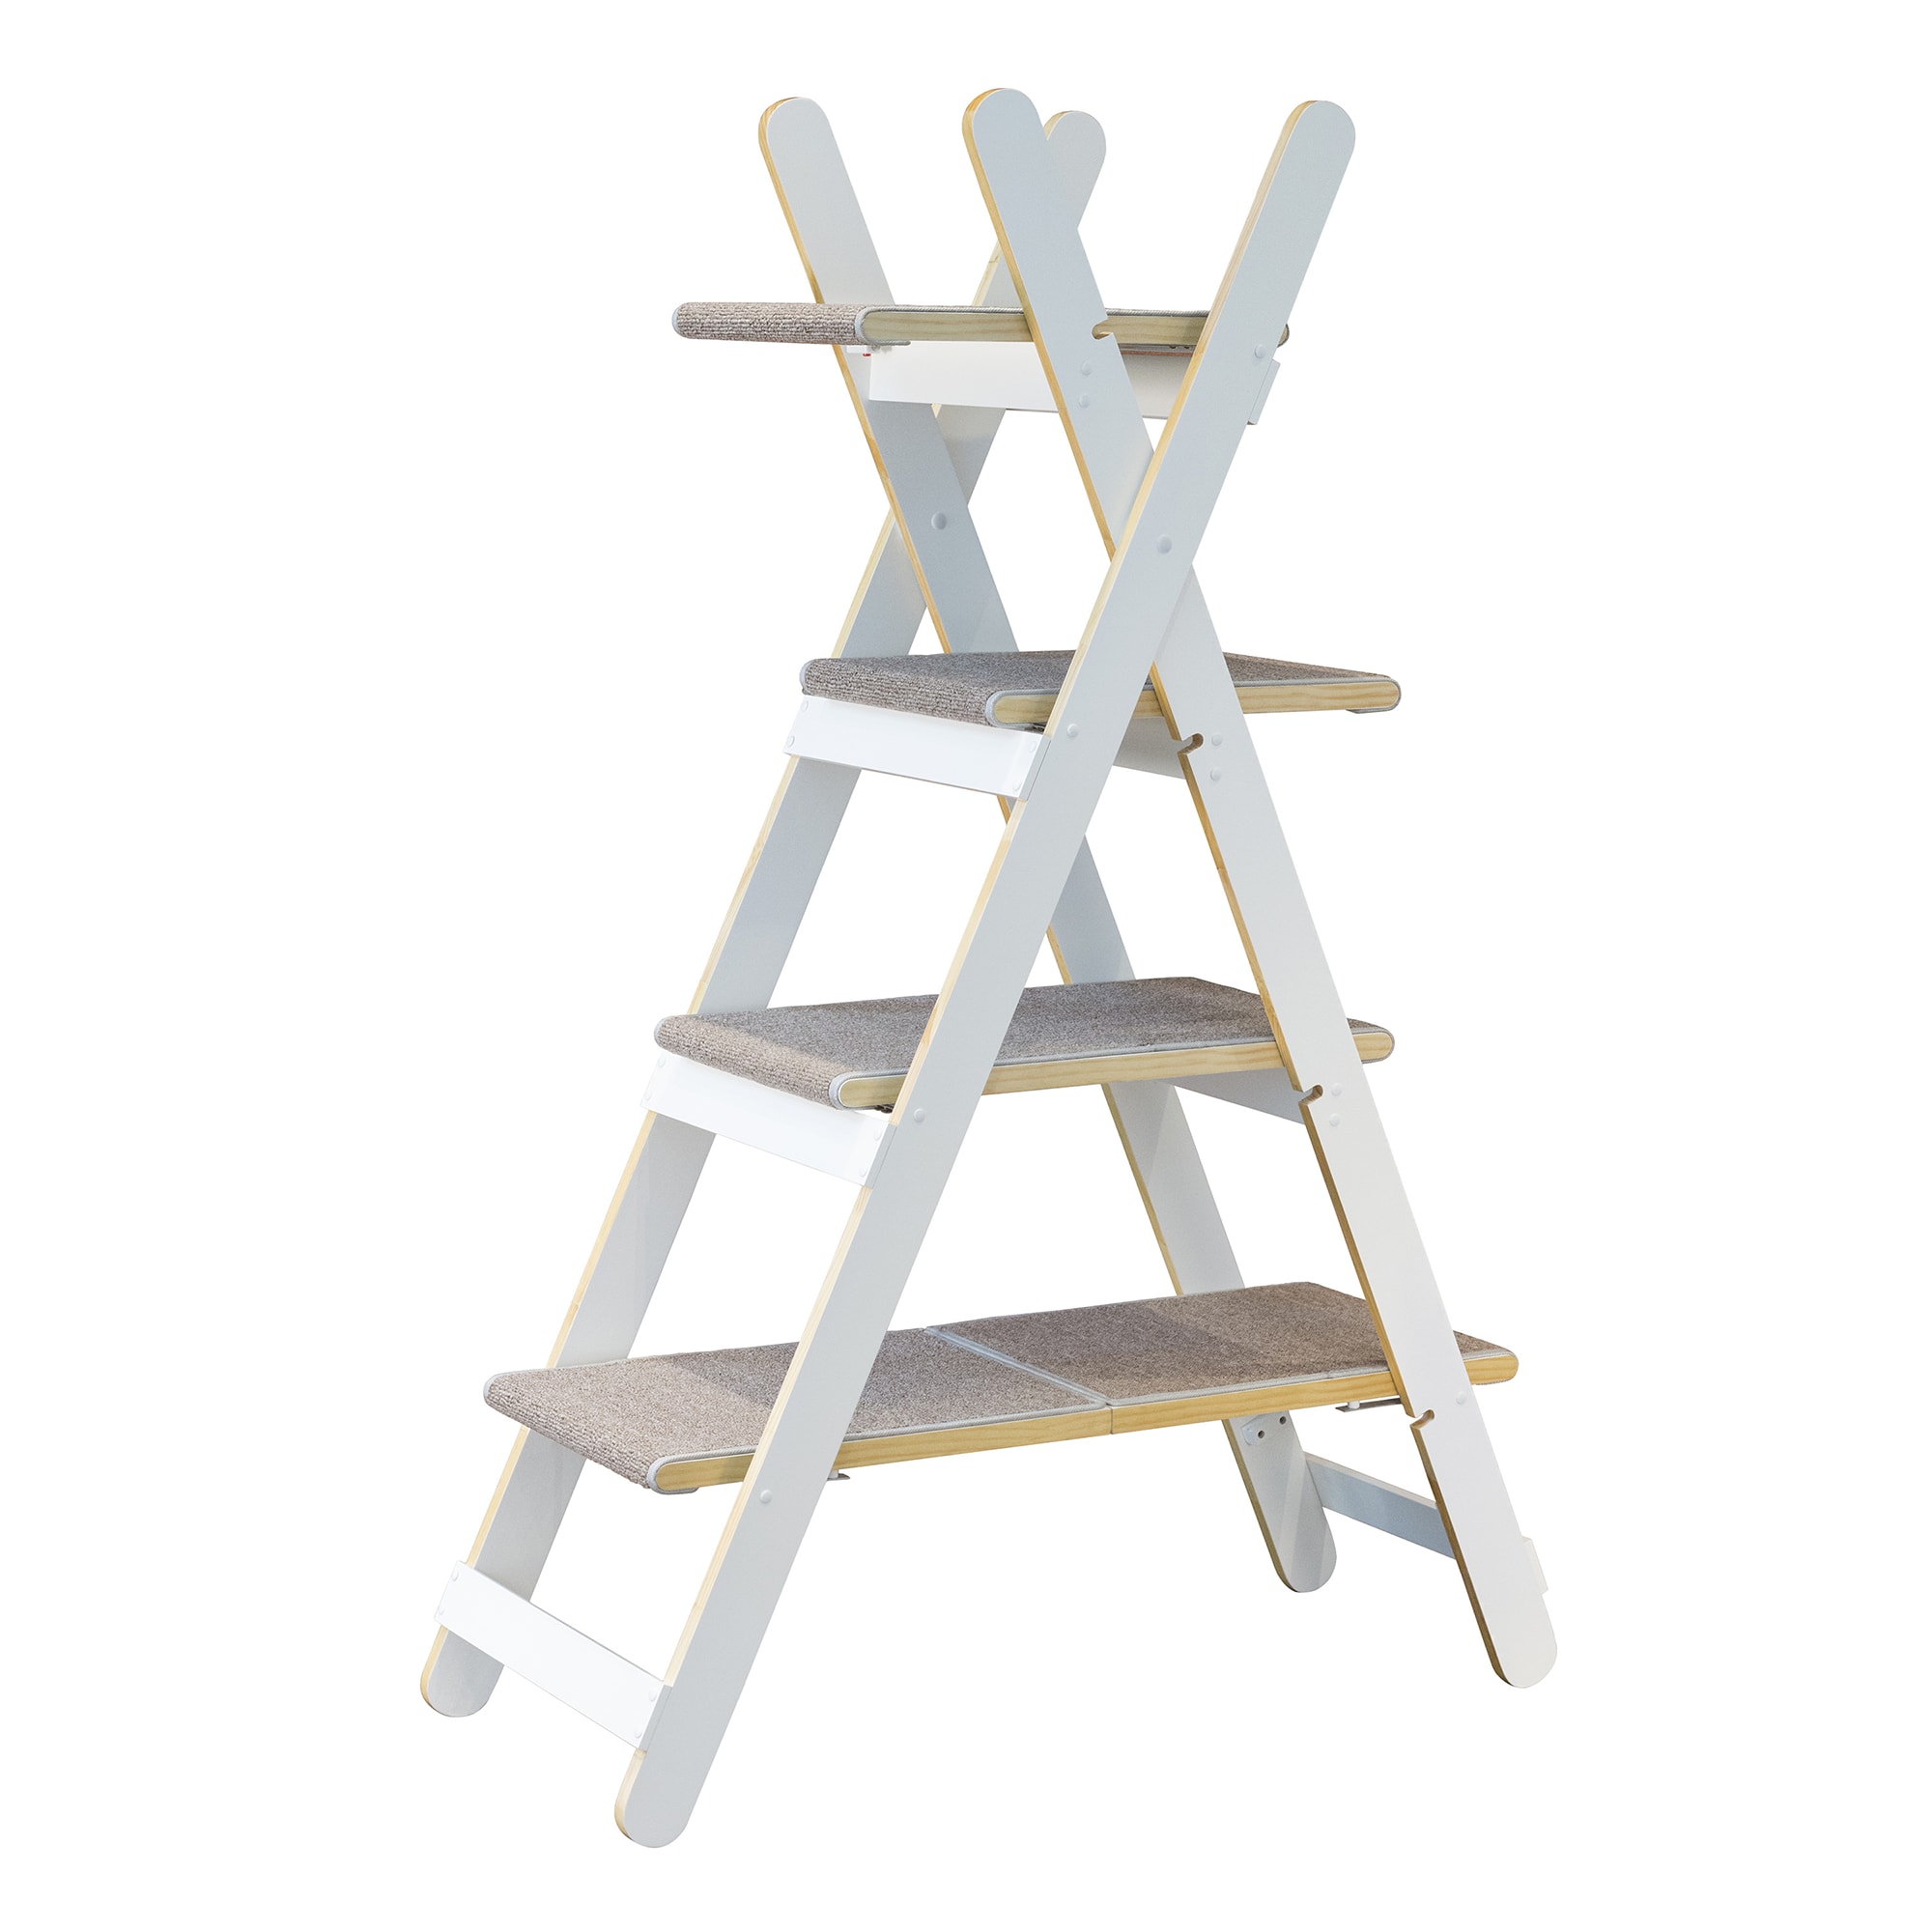 Photos - Other for Cats Zoovilla Zoovilla Modern Folding Cat Tree, 60.24" H, 34.17 LB, White / Nat